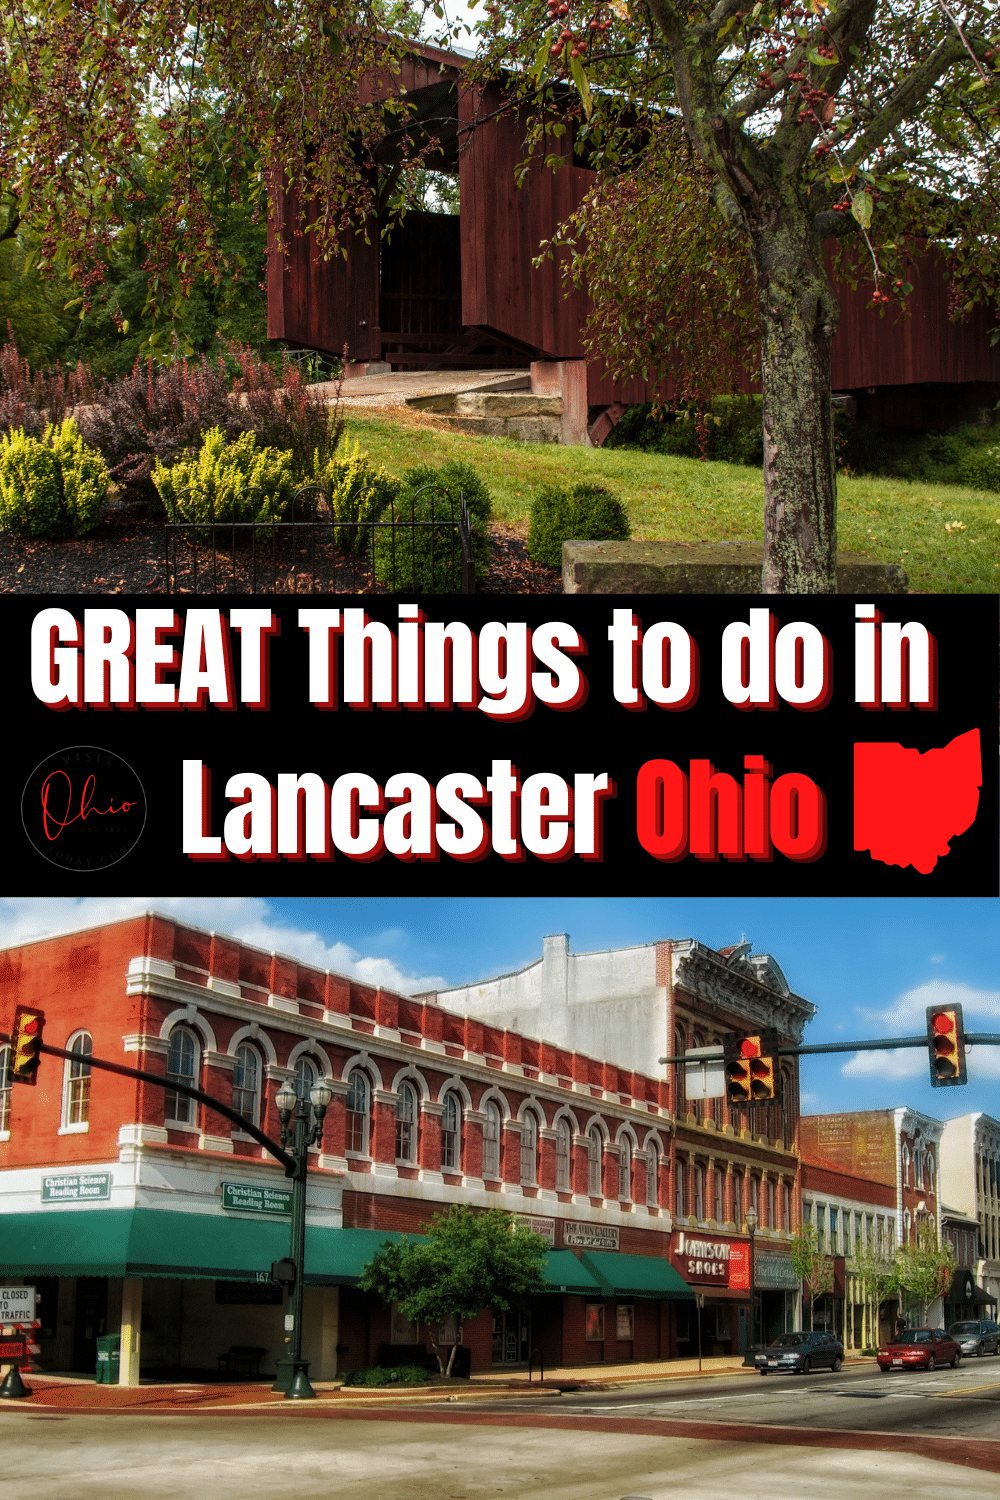 Lancaster is located in Fairfield County, Central Ohio. Lancaster Ohio is known as the gateway to the stunning Hocking Hills area and it is also known for its glass industry. Here are some of our top things to do in Lancaster Ohio for all ages to enjoy! | Things To Do In Lancaster Ohio | Fairfield County Ohio | Visit Ohio Today